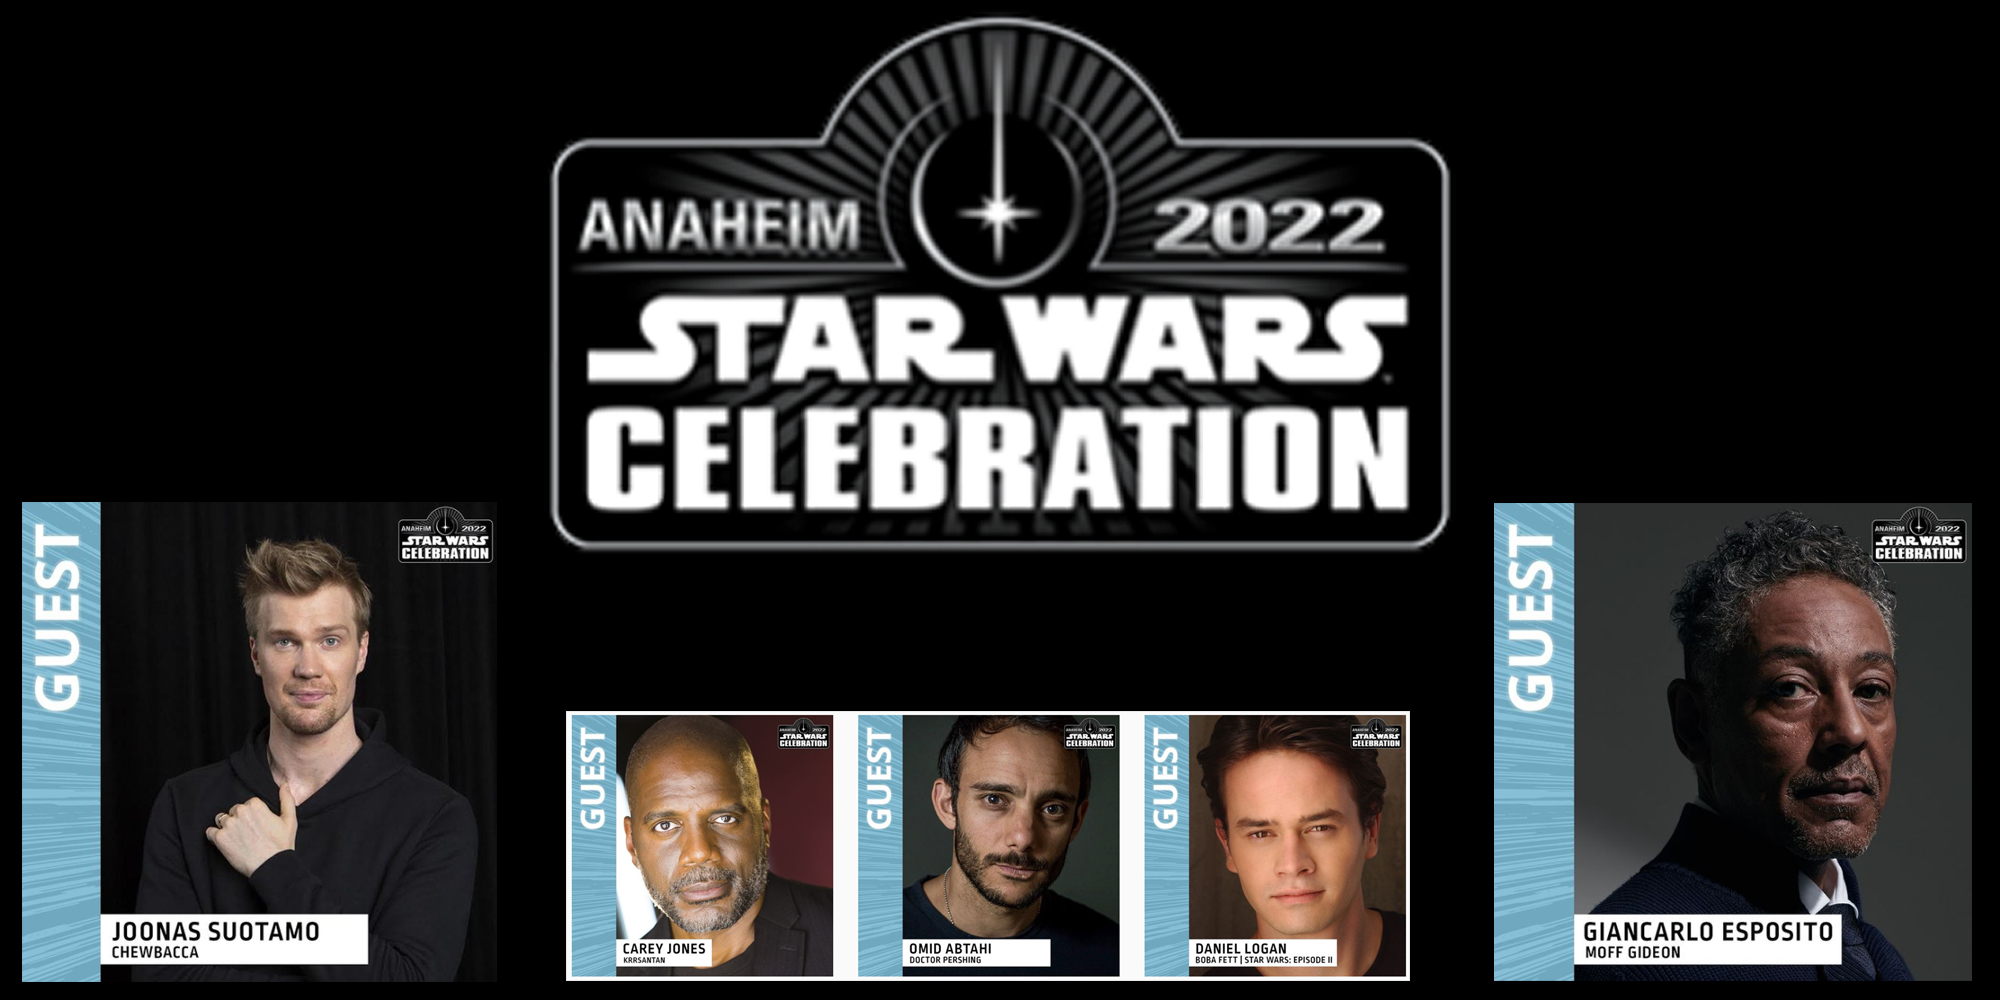 A Big Day For Star Wars Celebration Anaheim 2022 Announcements!